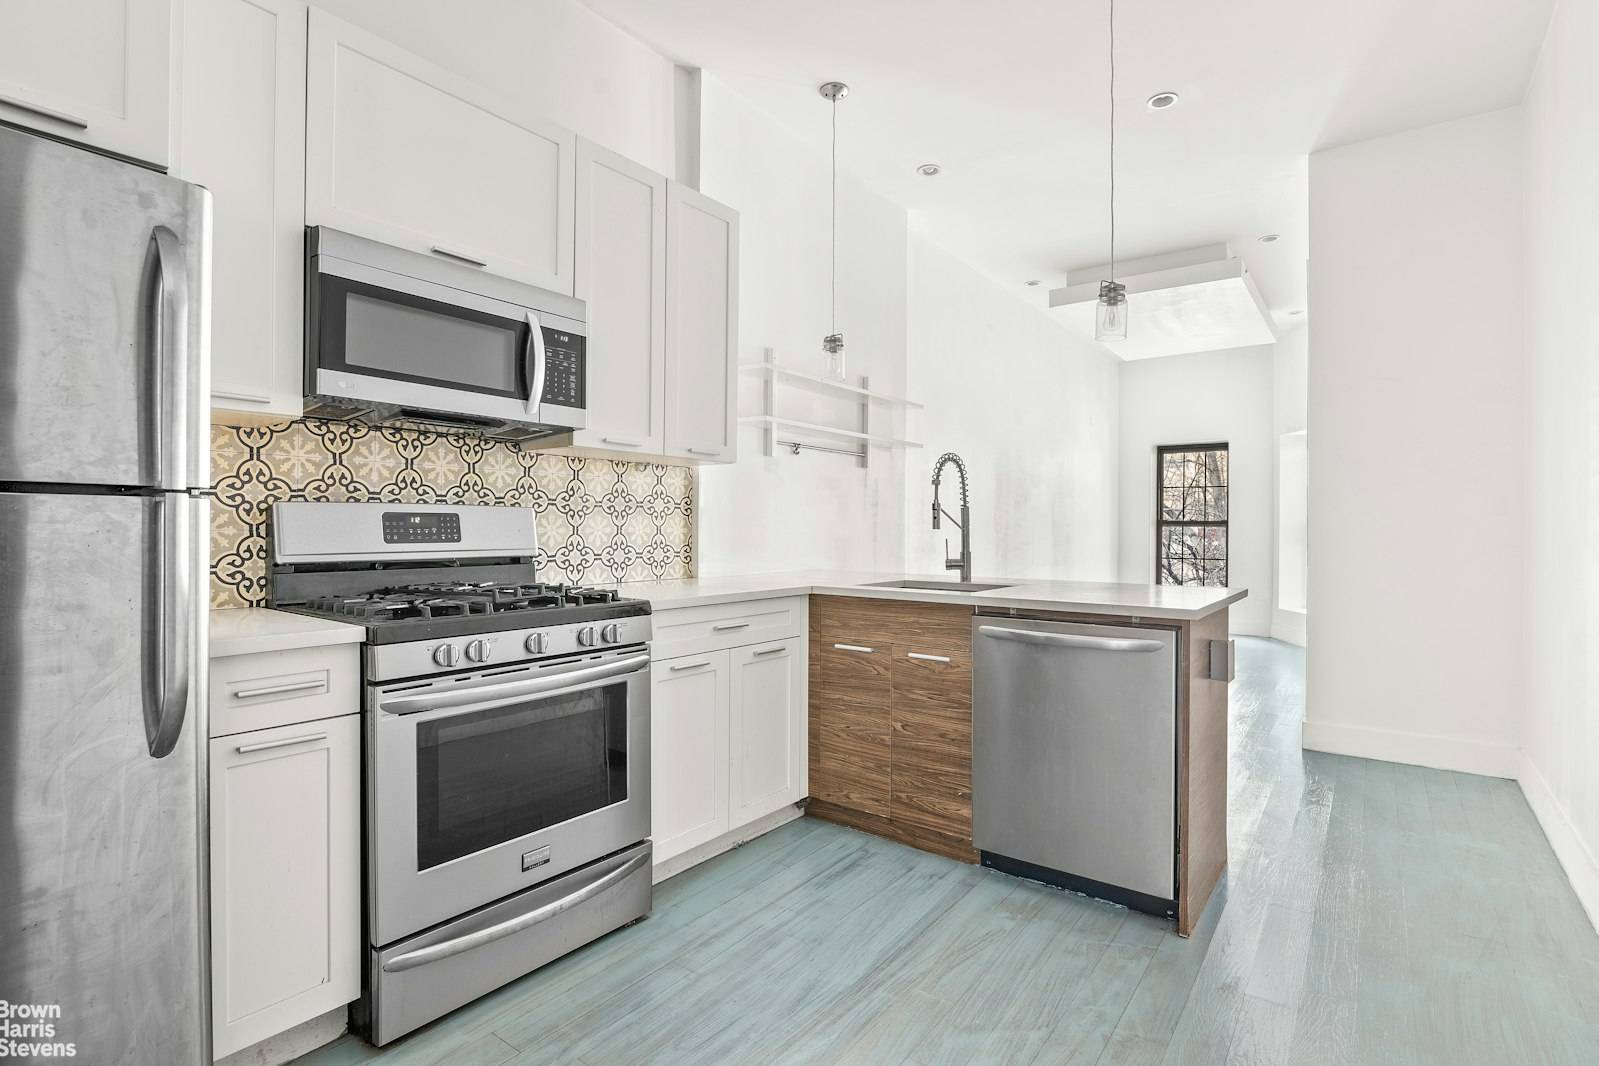 NO FEE Sunny and beautiful 3 bedroom apartment near some of Bed Stuy's most popular hangouts.